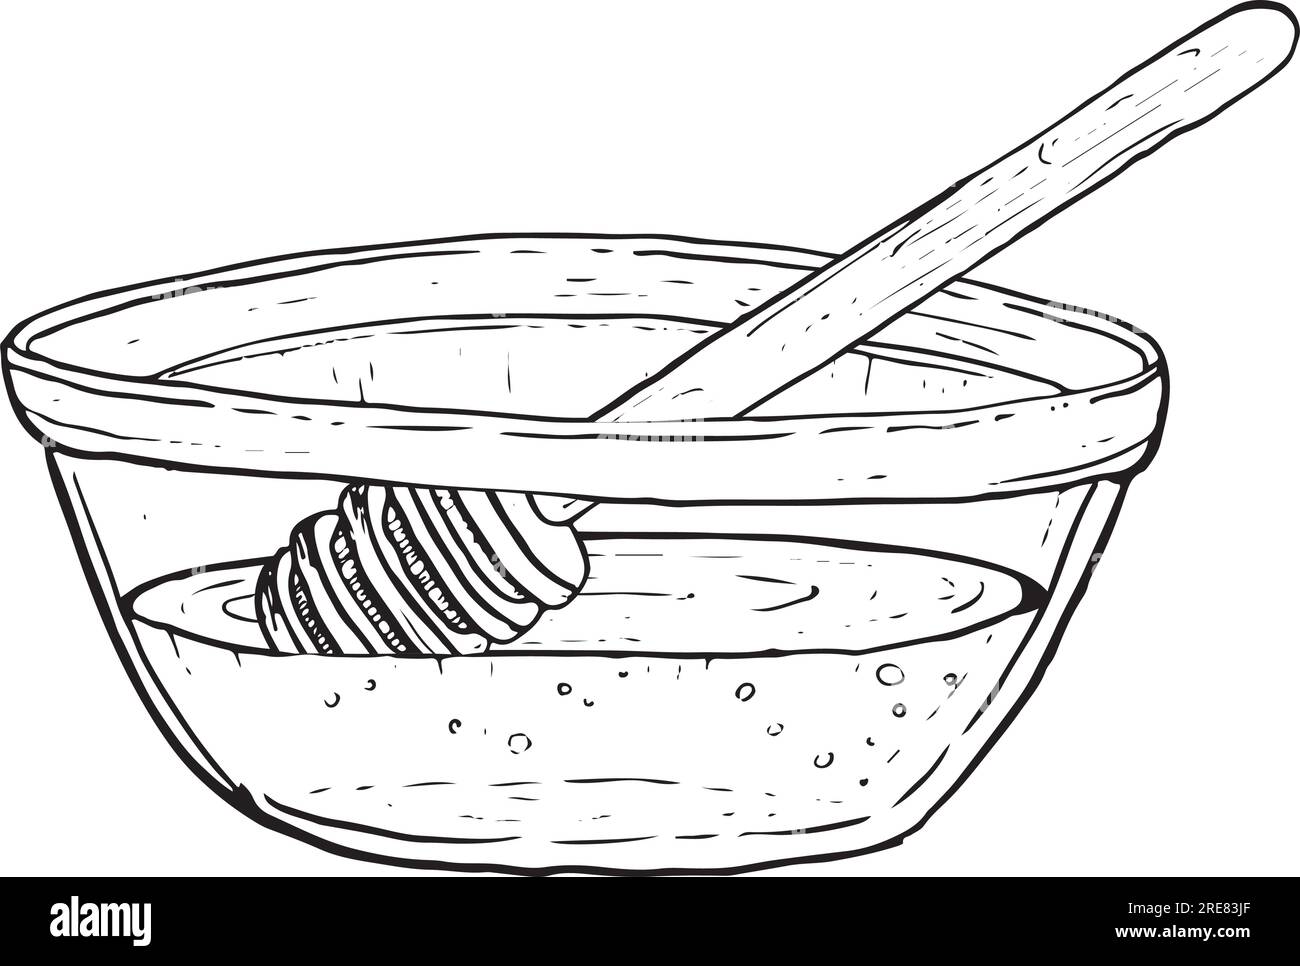 Honey In Glass Bowl With Wooden Dipper Spoon Vector Hand Drawn Line Sketch For Cookbooks